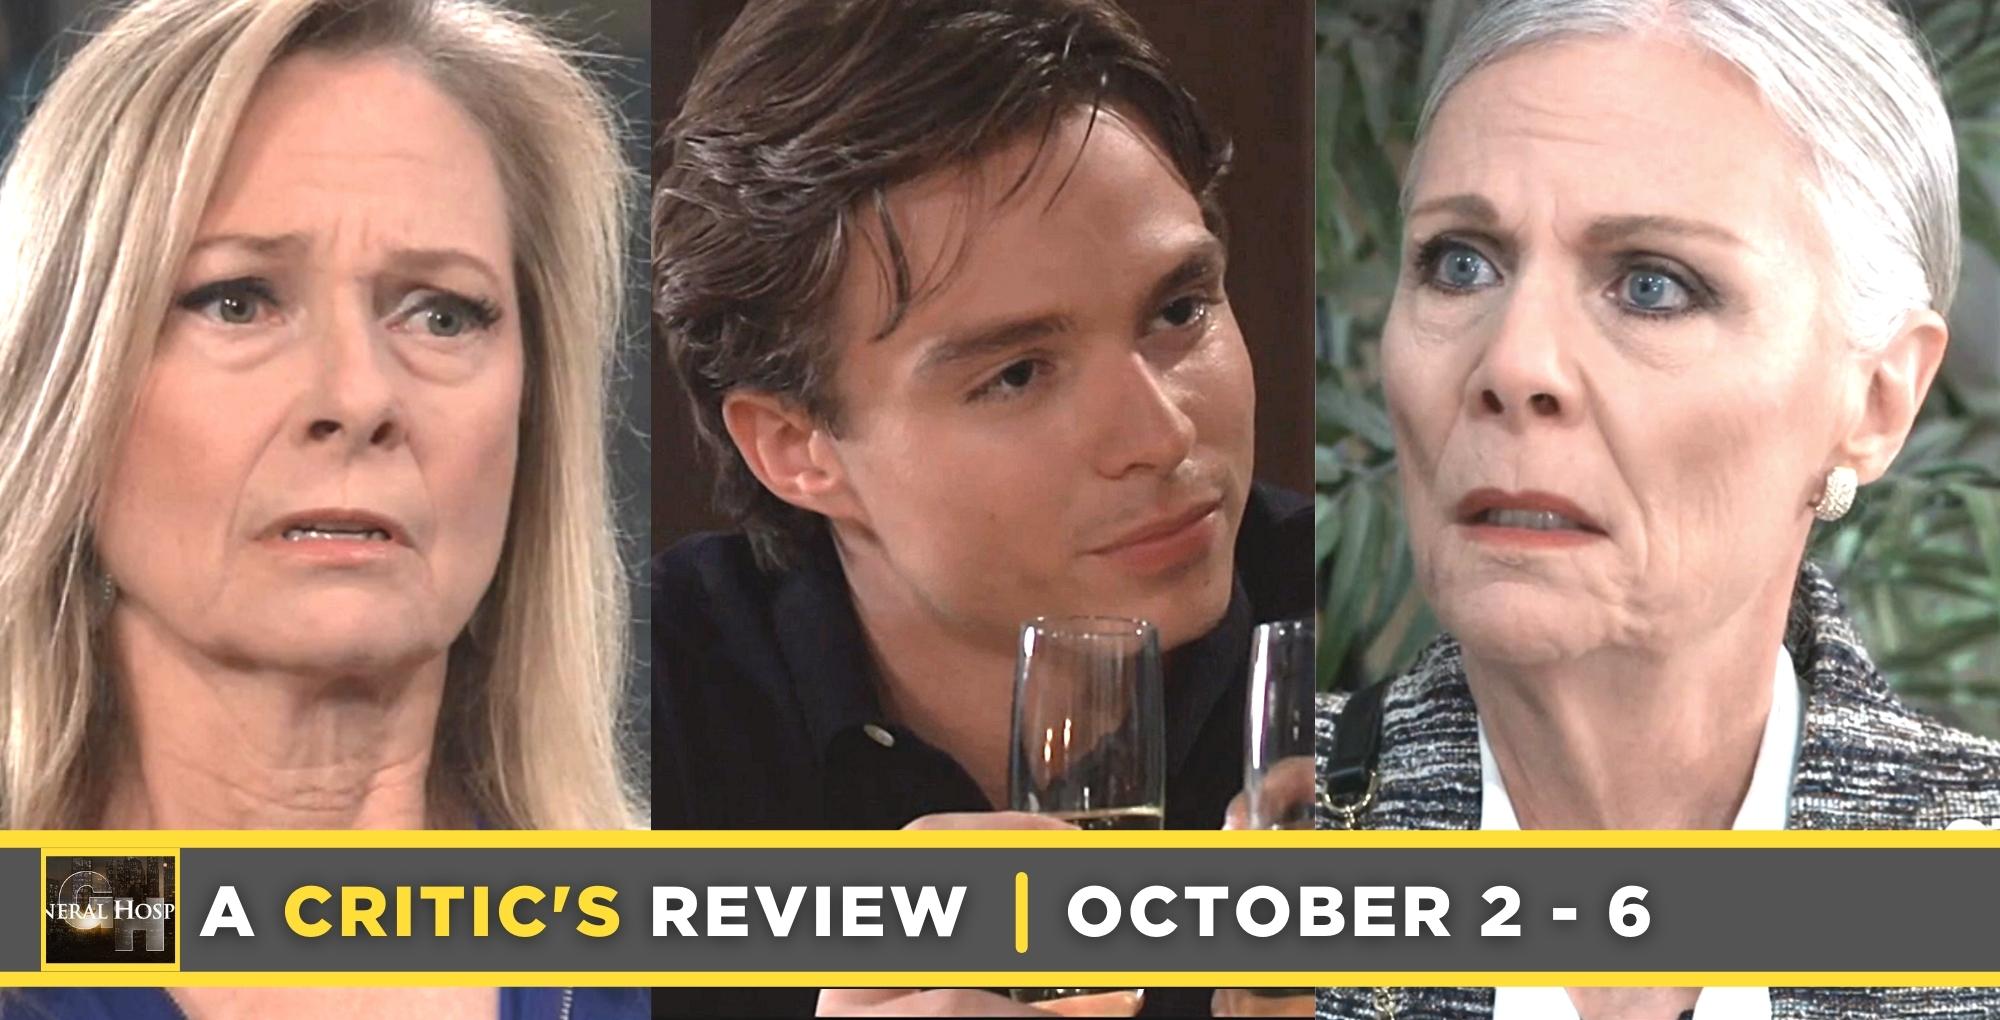 general hospital critic's review for october 2 – october 6, 2023, three images gladys, spencer, and tracy.